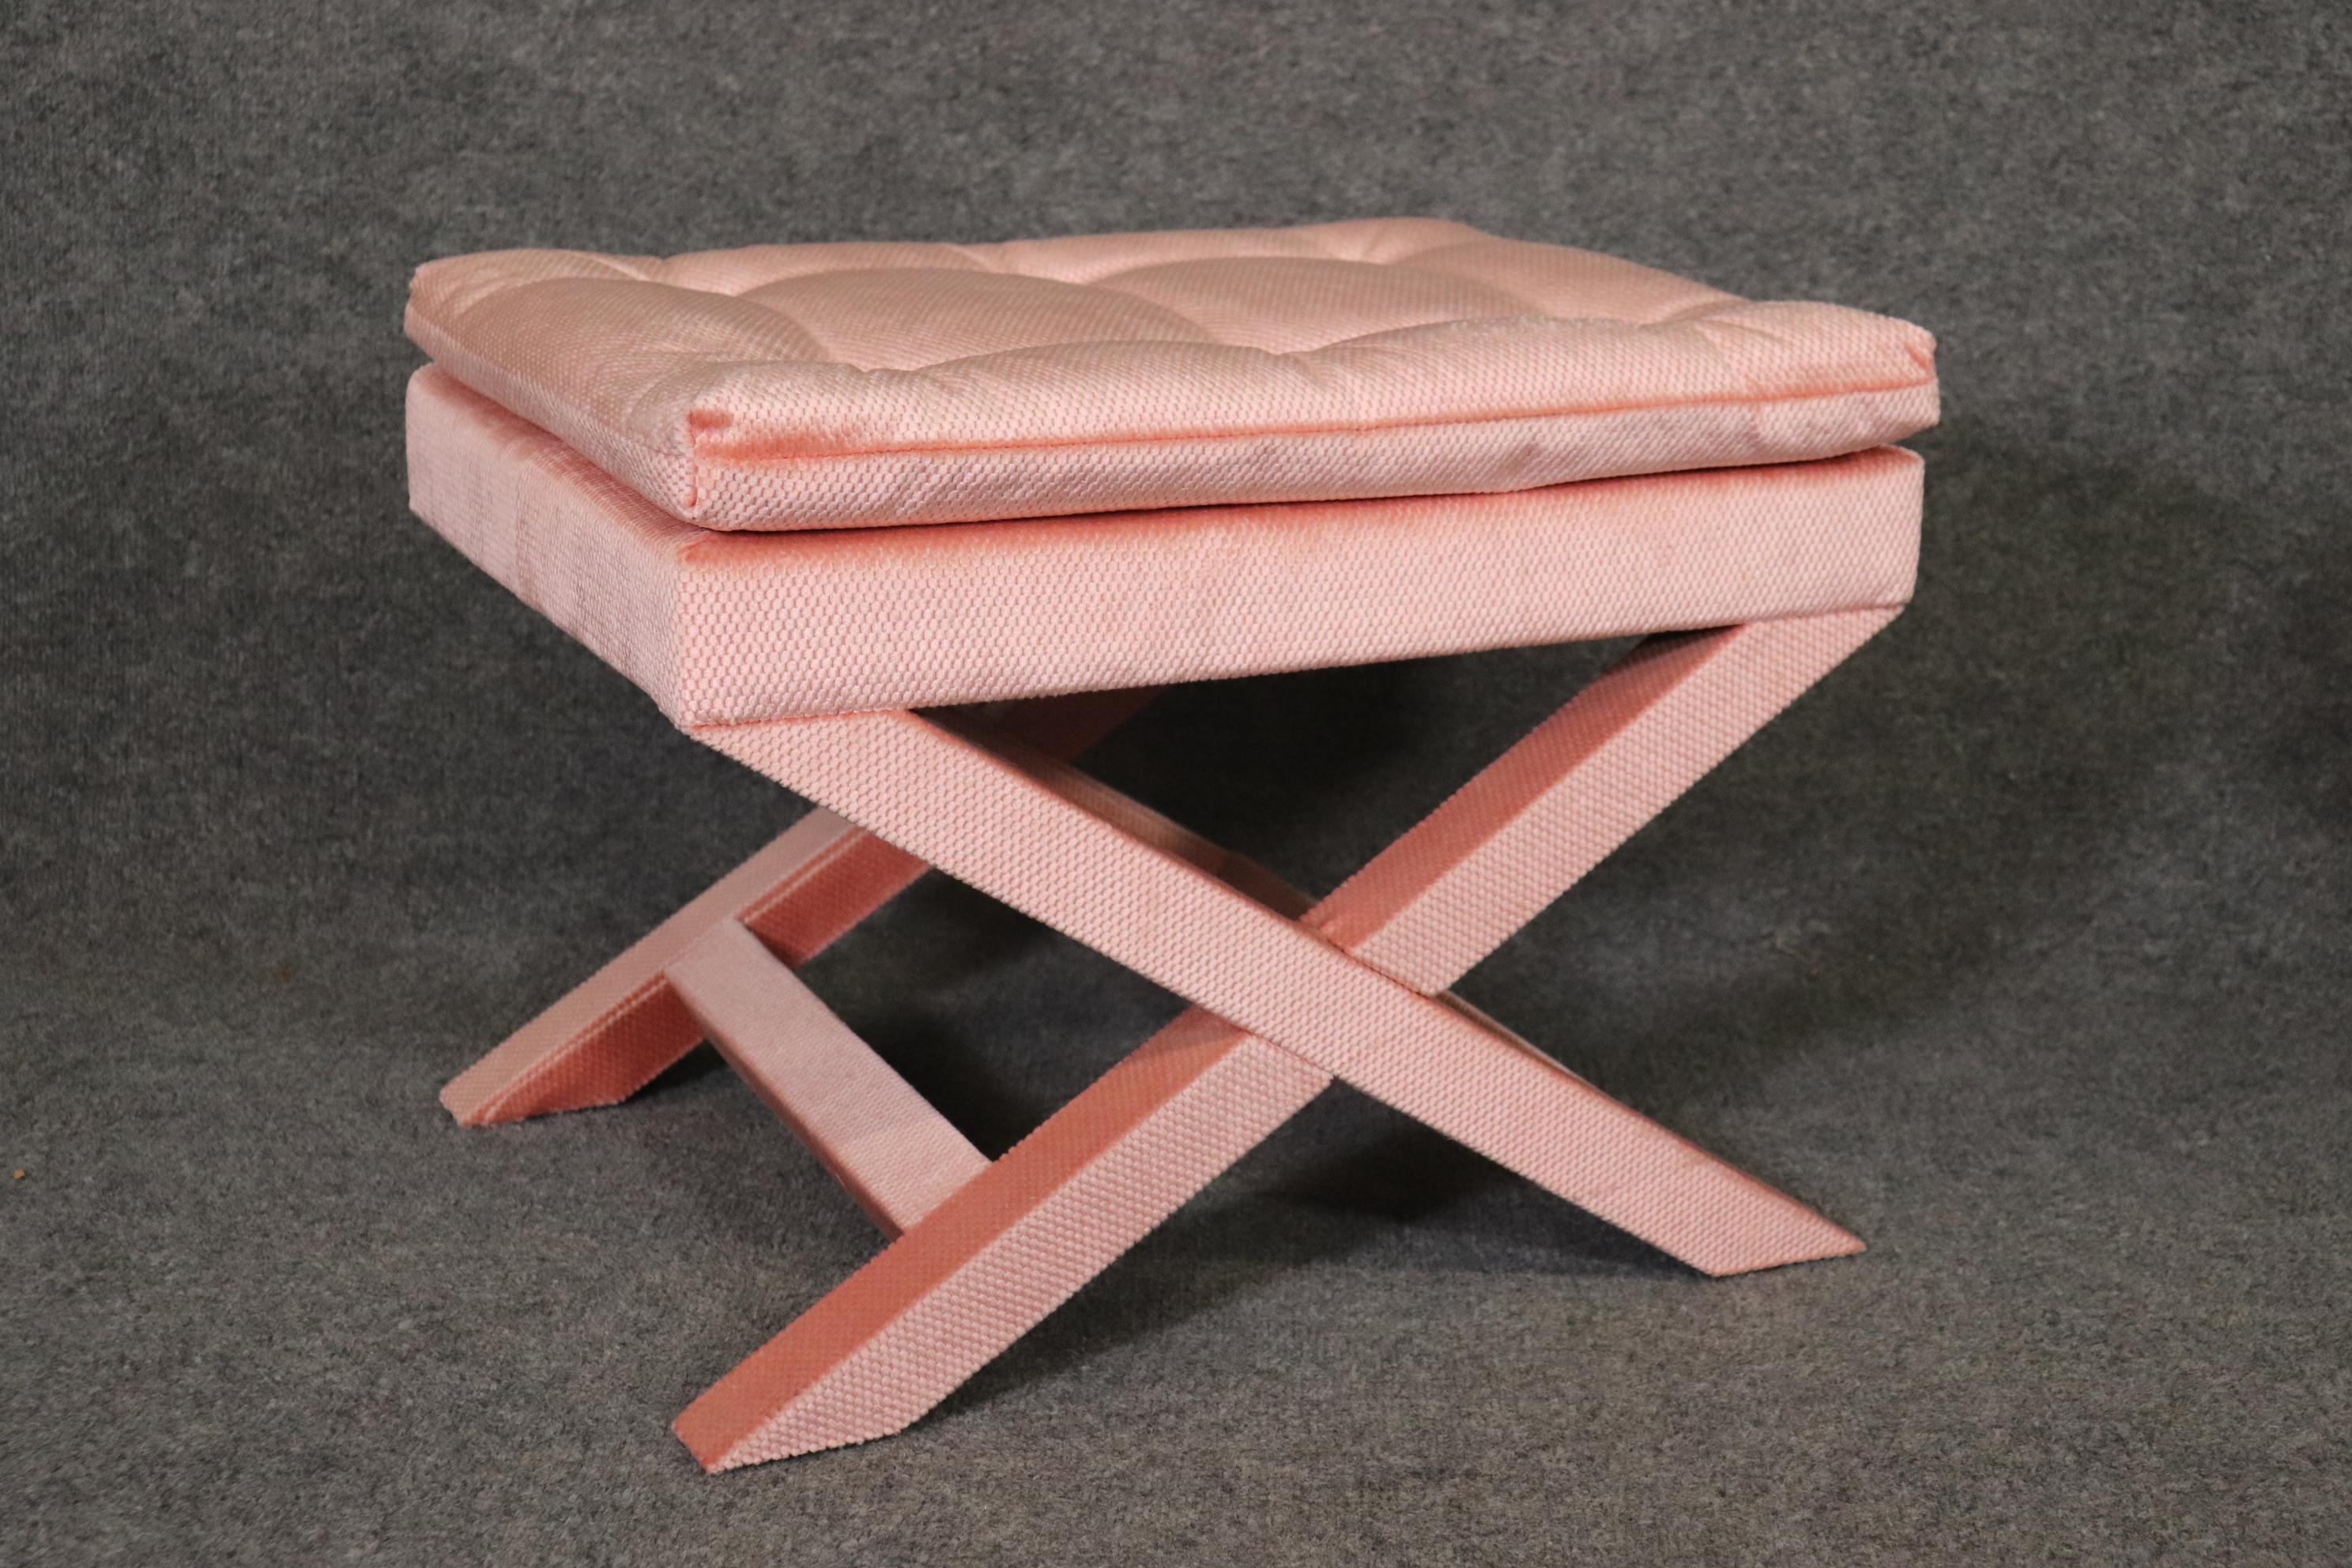 This Pair of Dorothy Draper Style X Benches are upholstered in high quality pink fabric the seats are tufted. They are from the late 90's and will add a luxurious yet minimal touch to your home or office! The benches are in great condition and don't